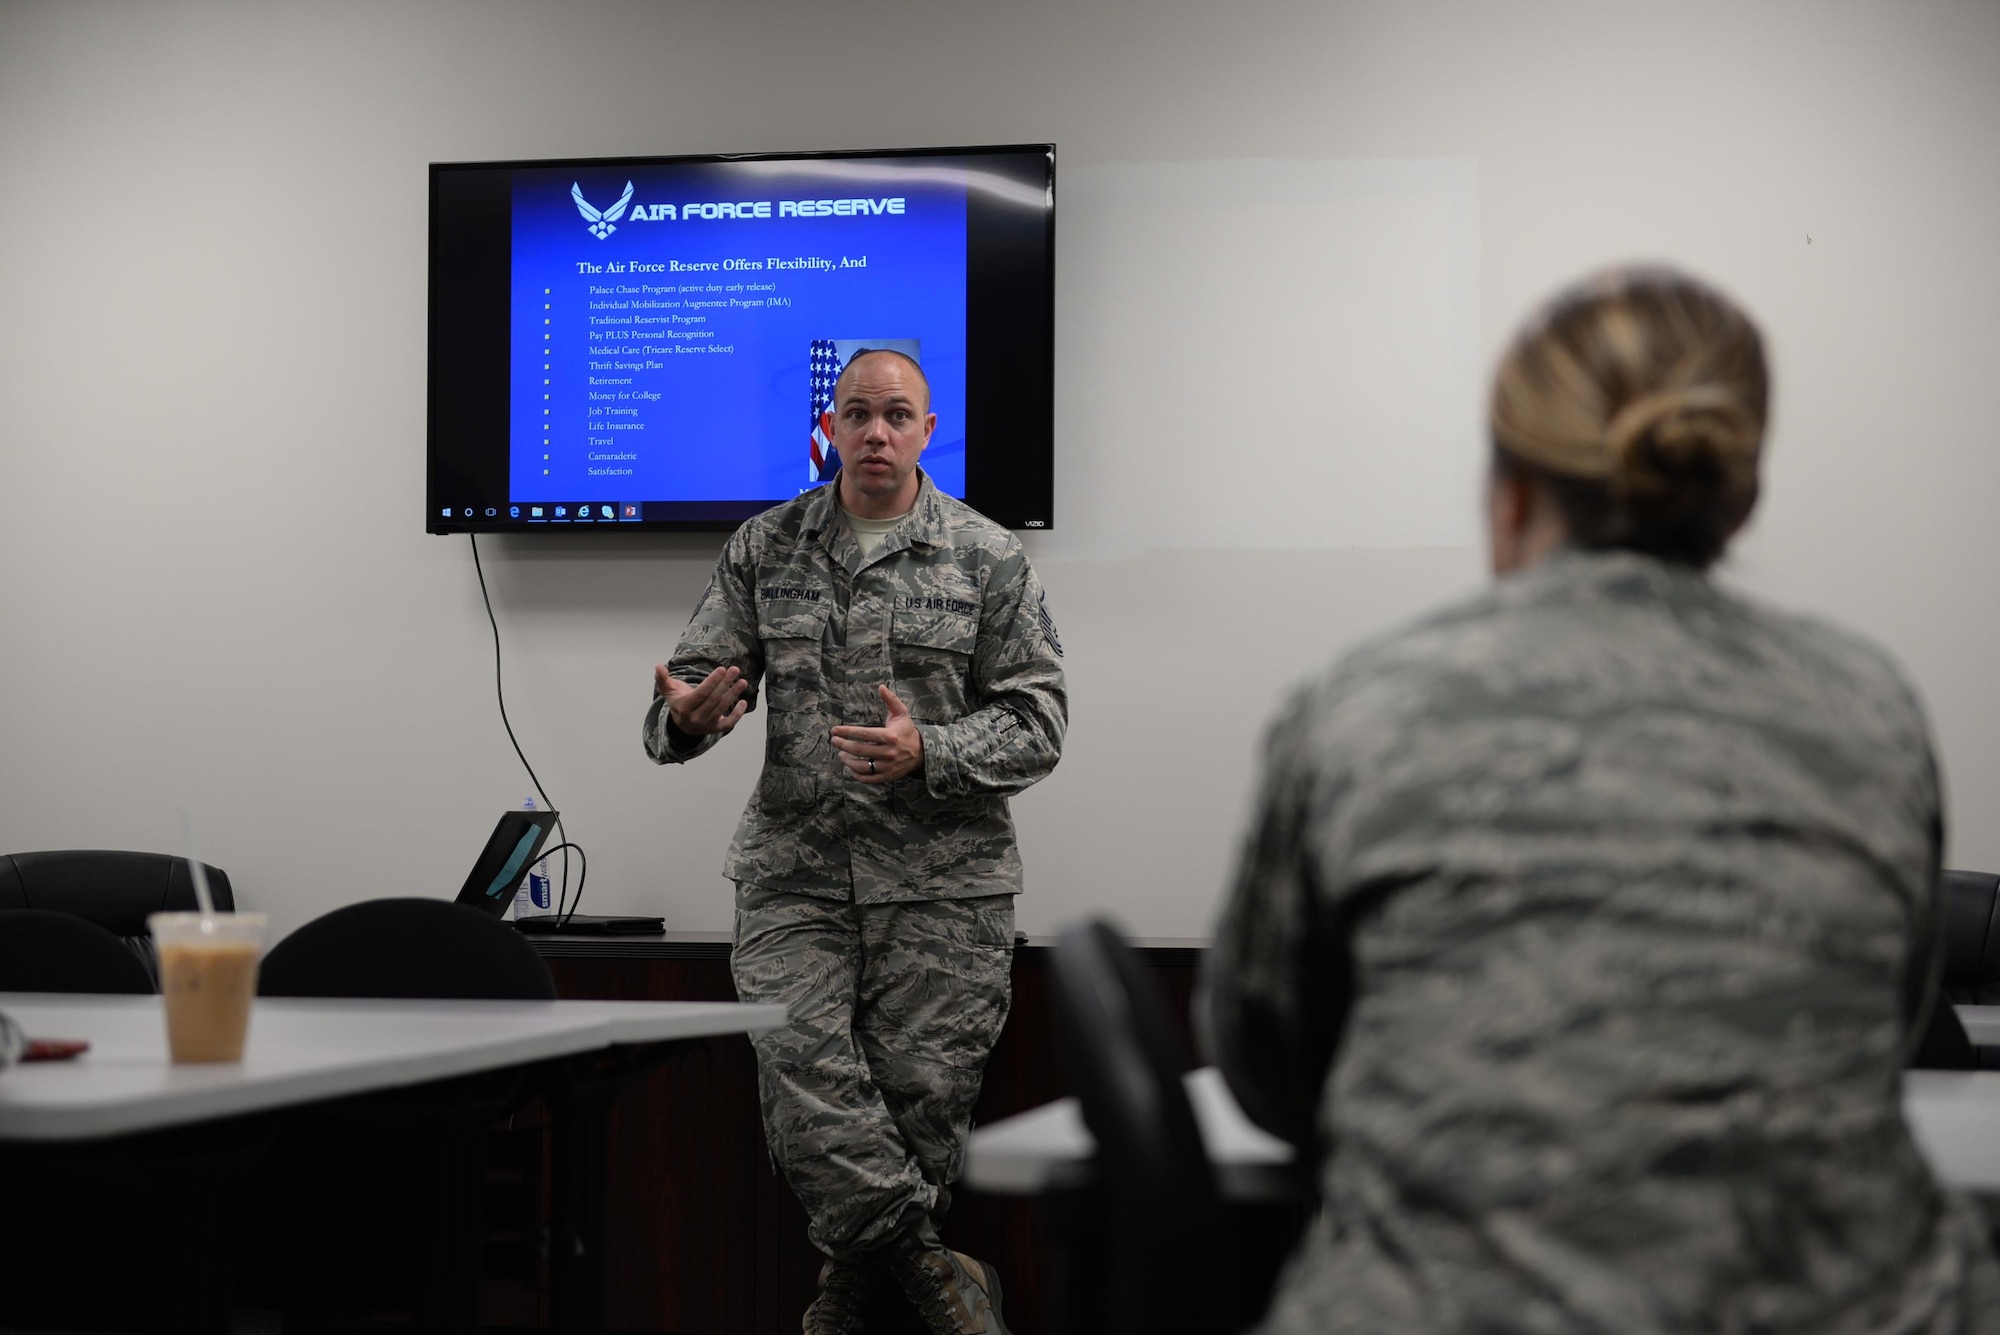 Master Sgt. Dustin Ballingham, 908th Airlift Wing Recruiting Squadron Recruiter, briefs Airmen May 10, 2017, at Columbus Air Force Base, Mississippi. Ballingham talked about the Air Force Reserve Command, programs for transitioning, the benefits the Reserves has to offer and more. (U.S. Air Force photo by Senior Airman John Day)